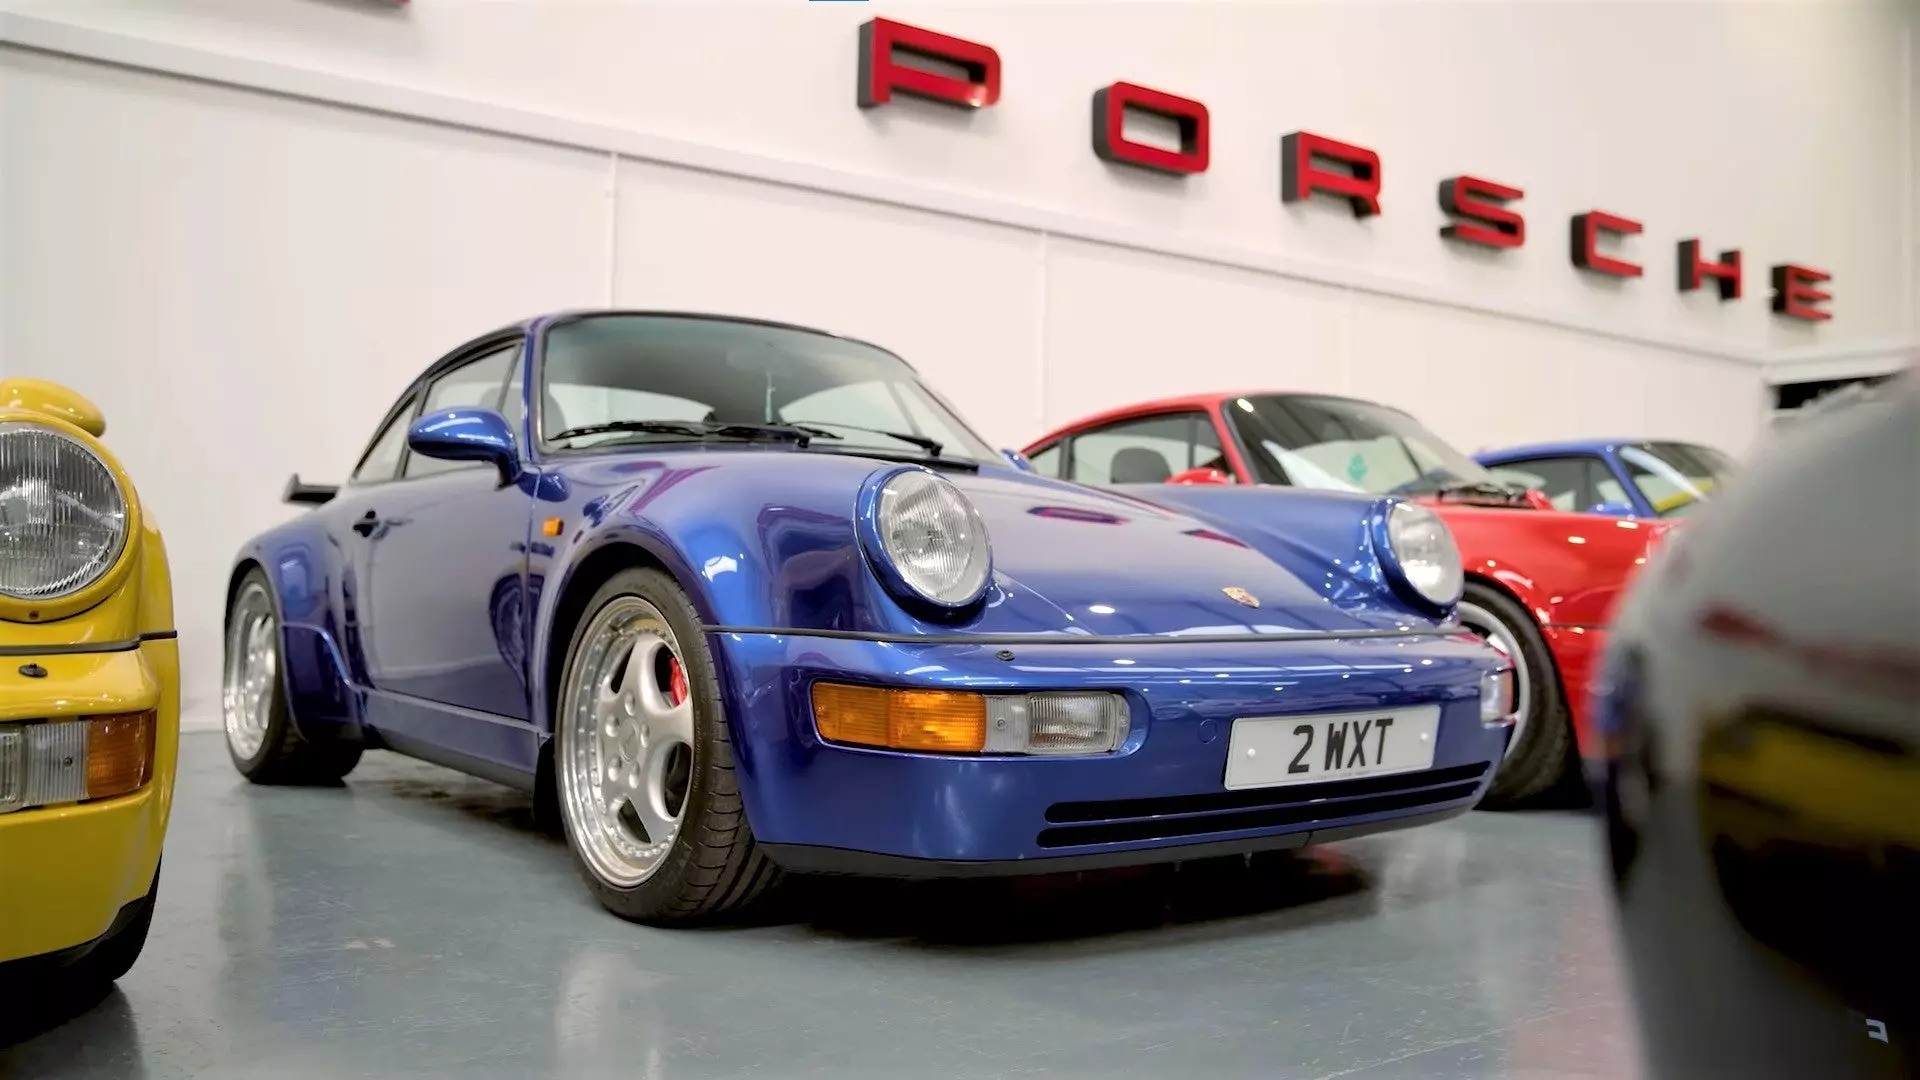 Chris Harris’s Walkthrough of This Car Collection Is a Great Primer for Porsche Research | Autance